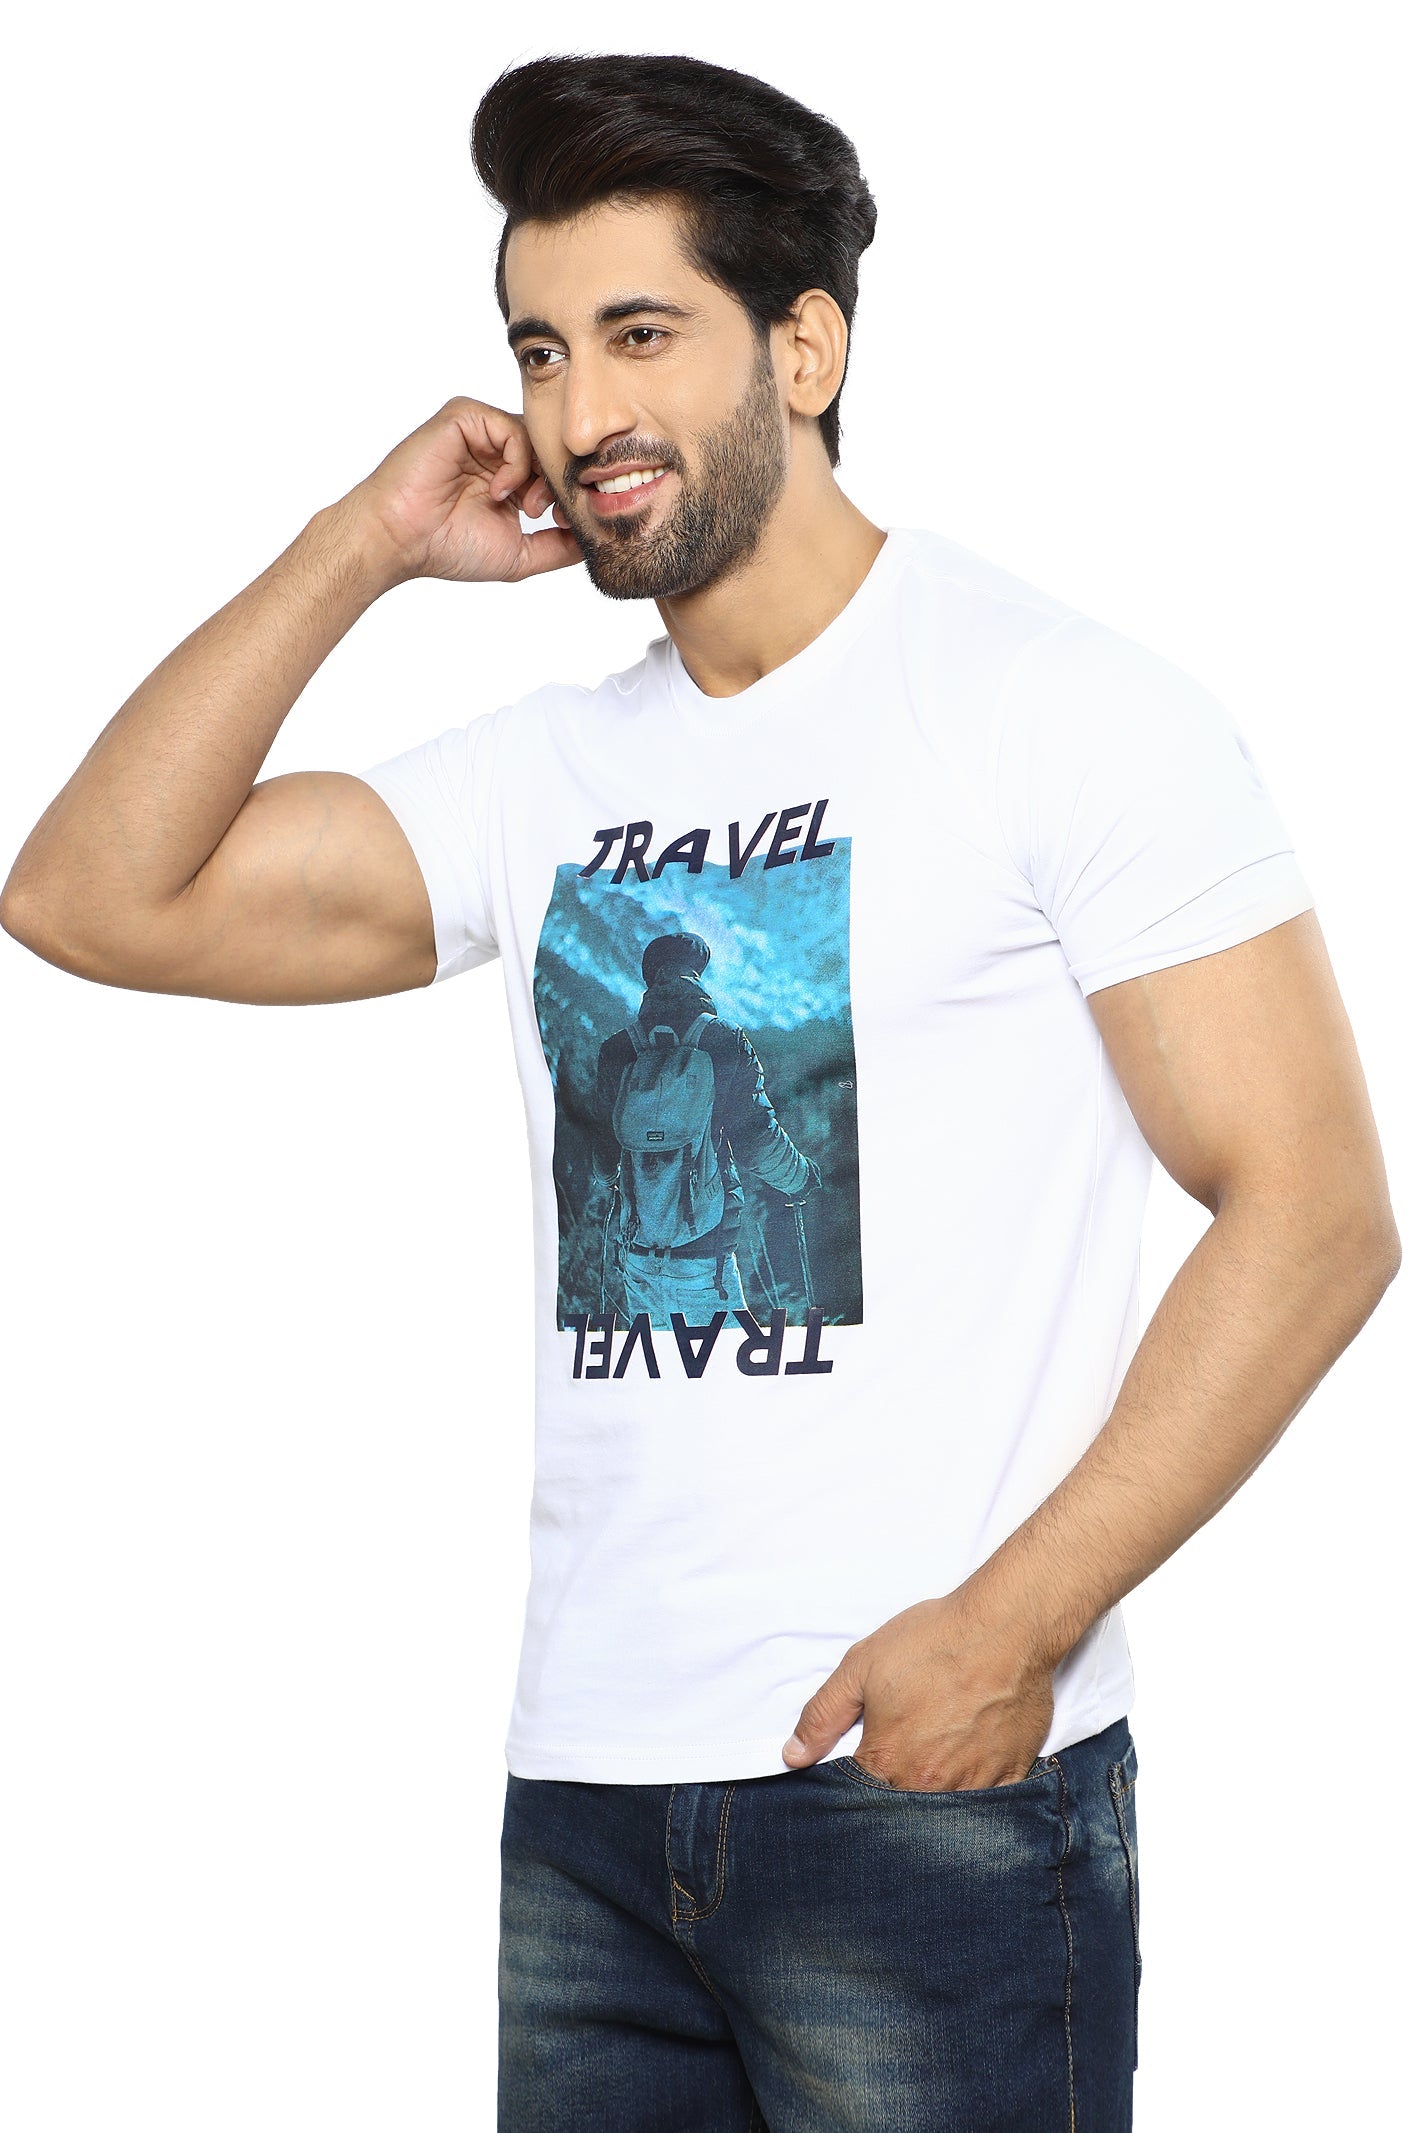 Diners Men's Round Neck T-Shirt SKU: NA859-WHITE - Diners